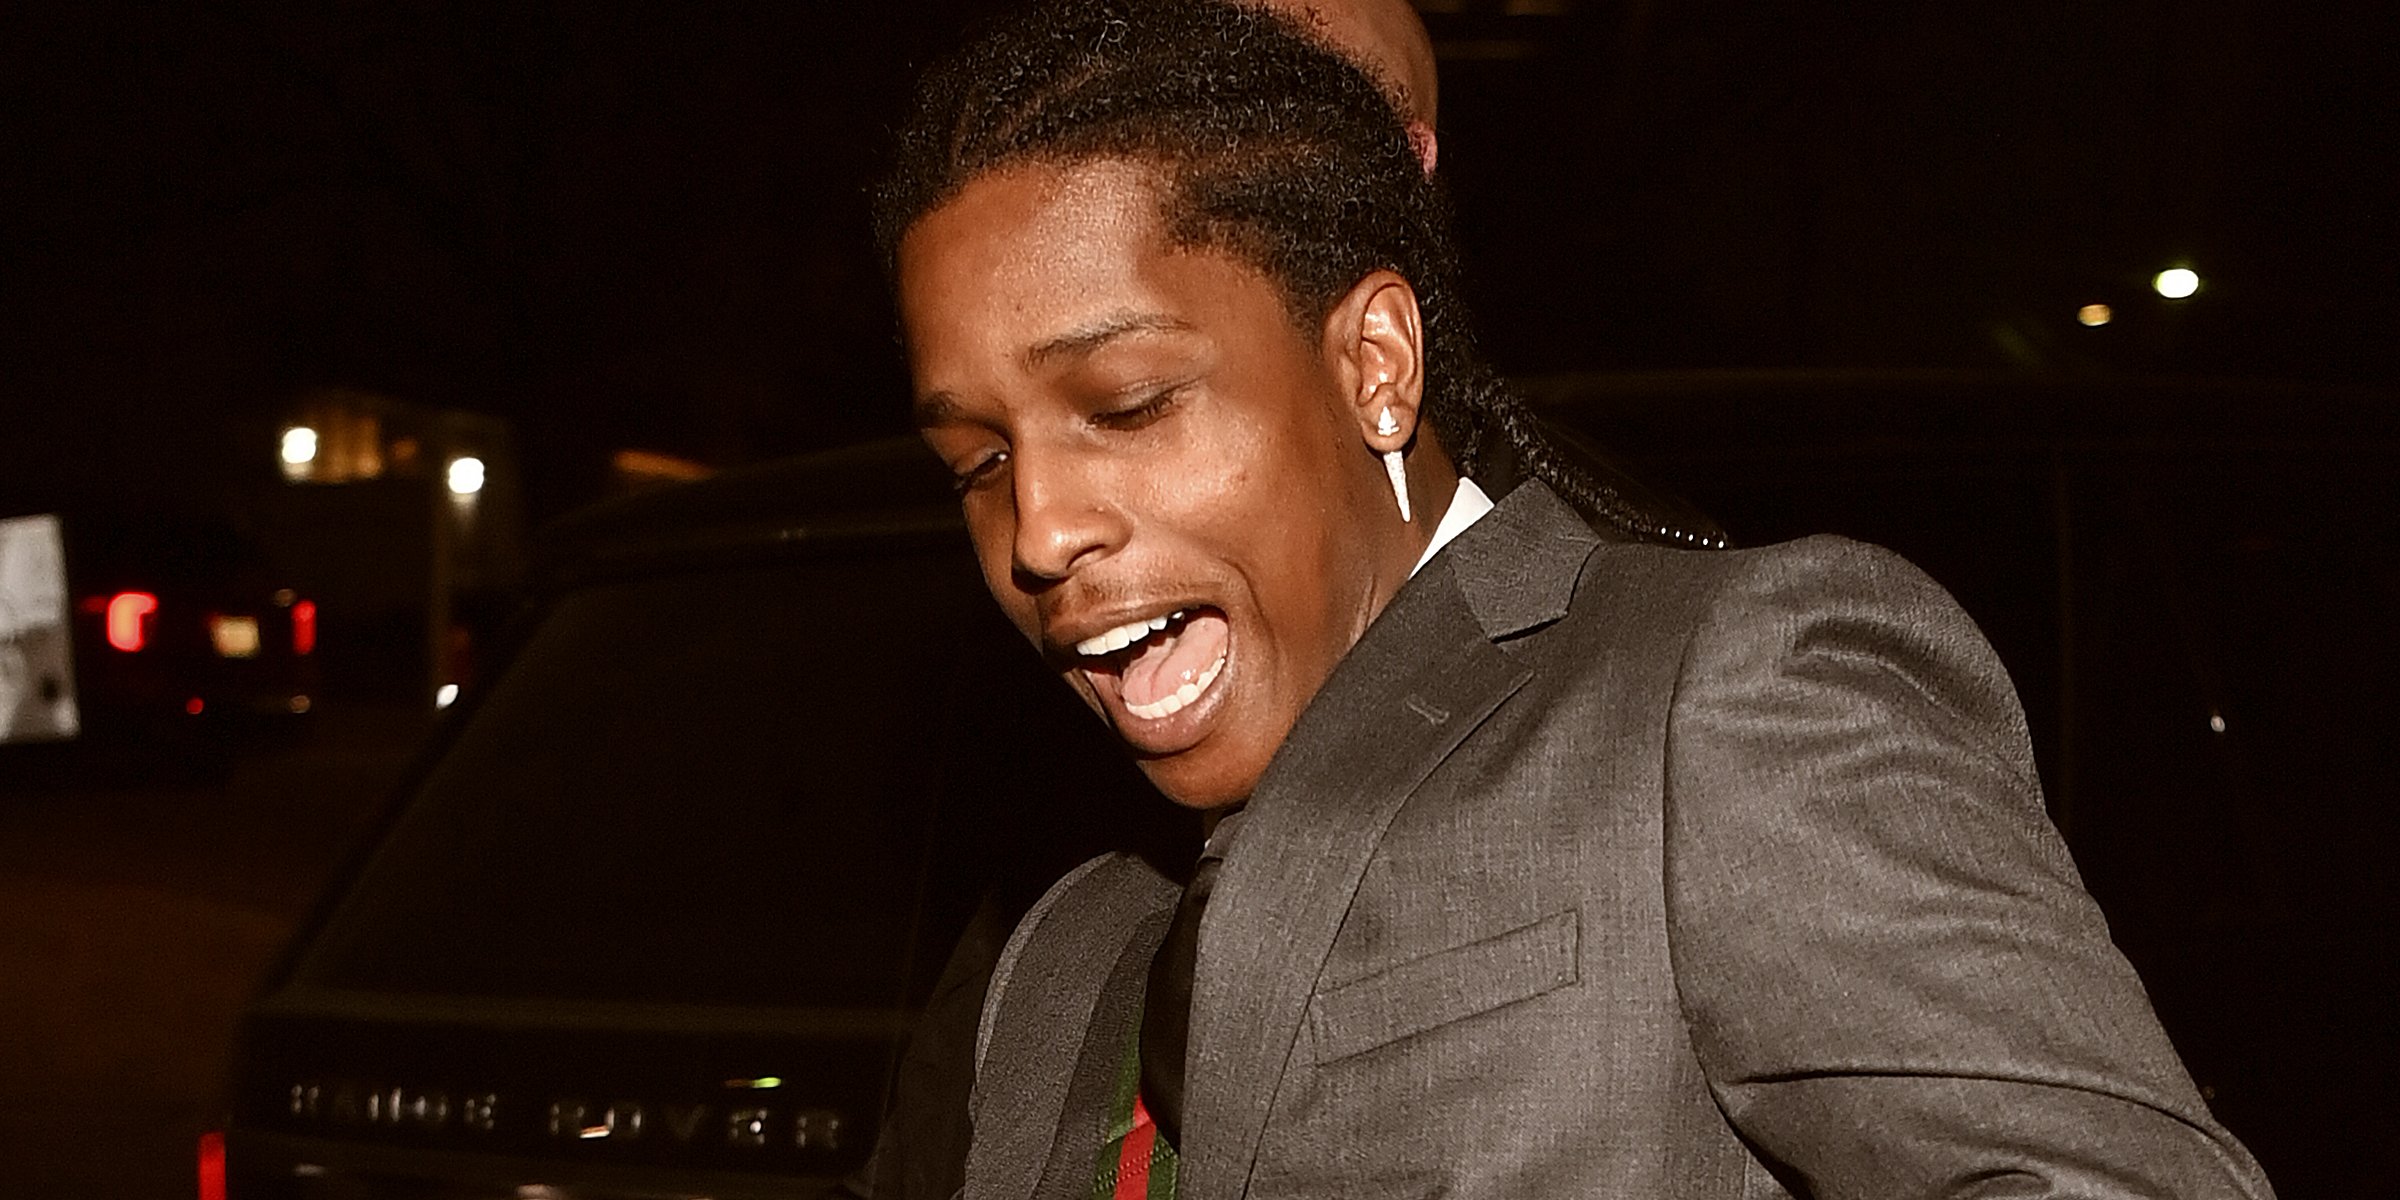 ASAP Rocky | Source: Getty Images